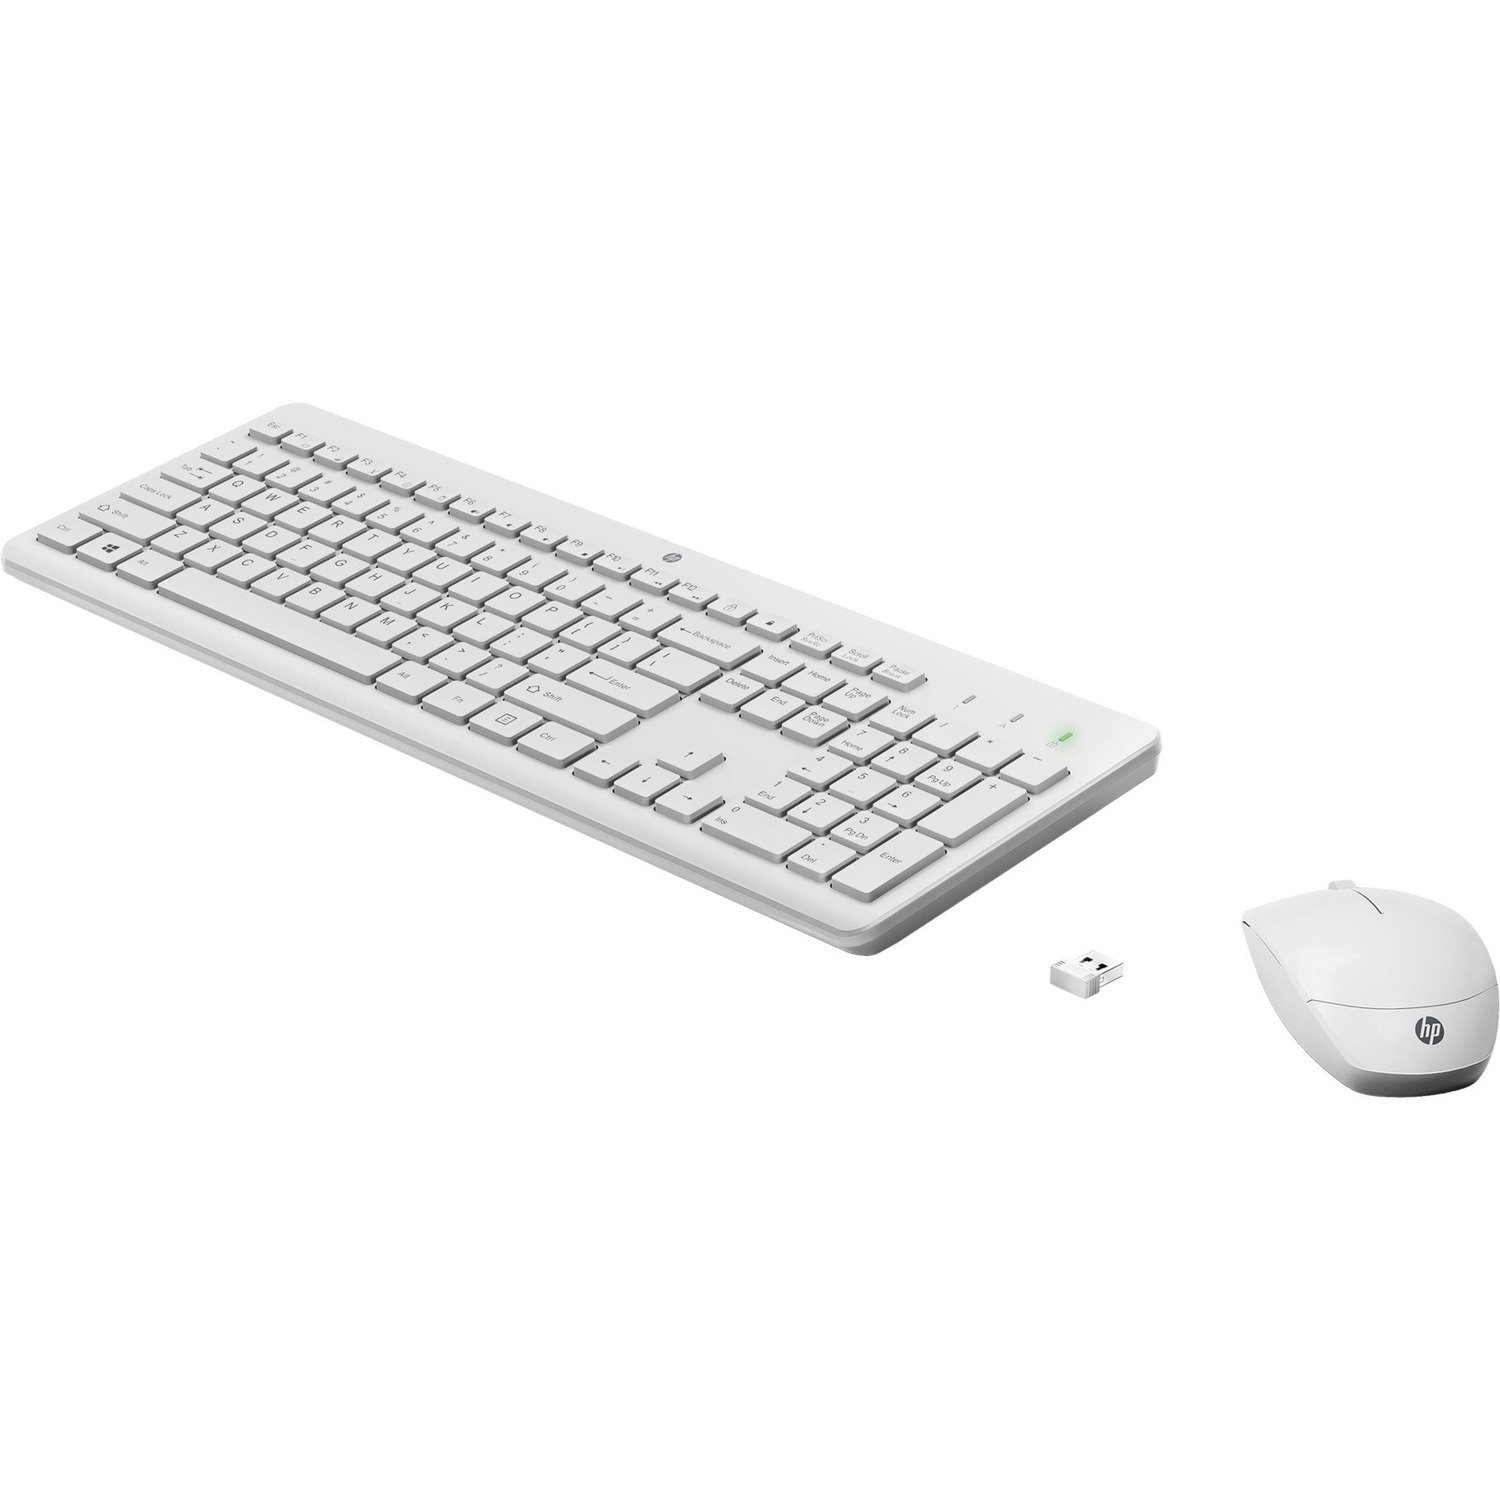 HP 230 Keyboard & Mouse